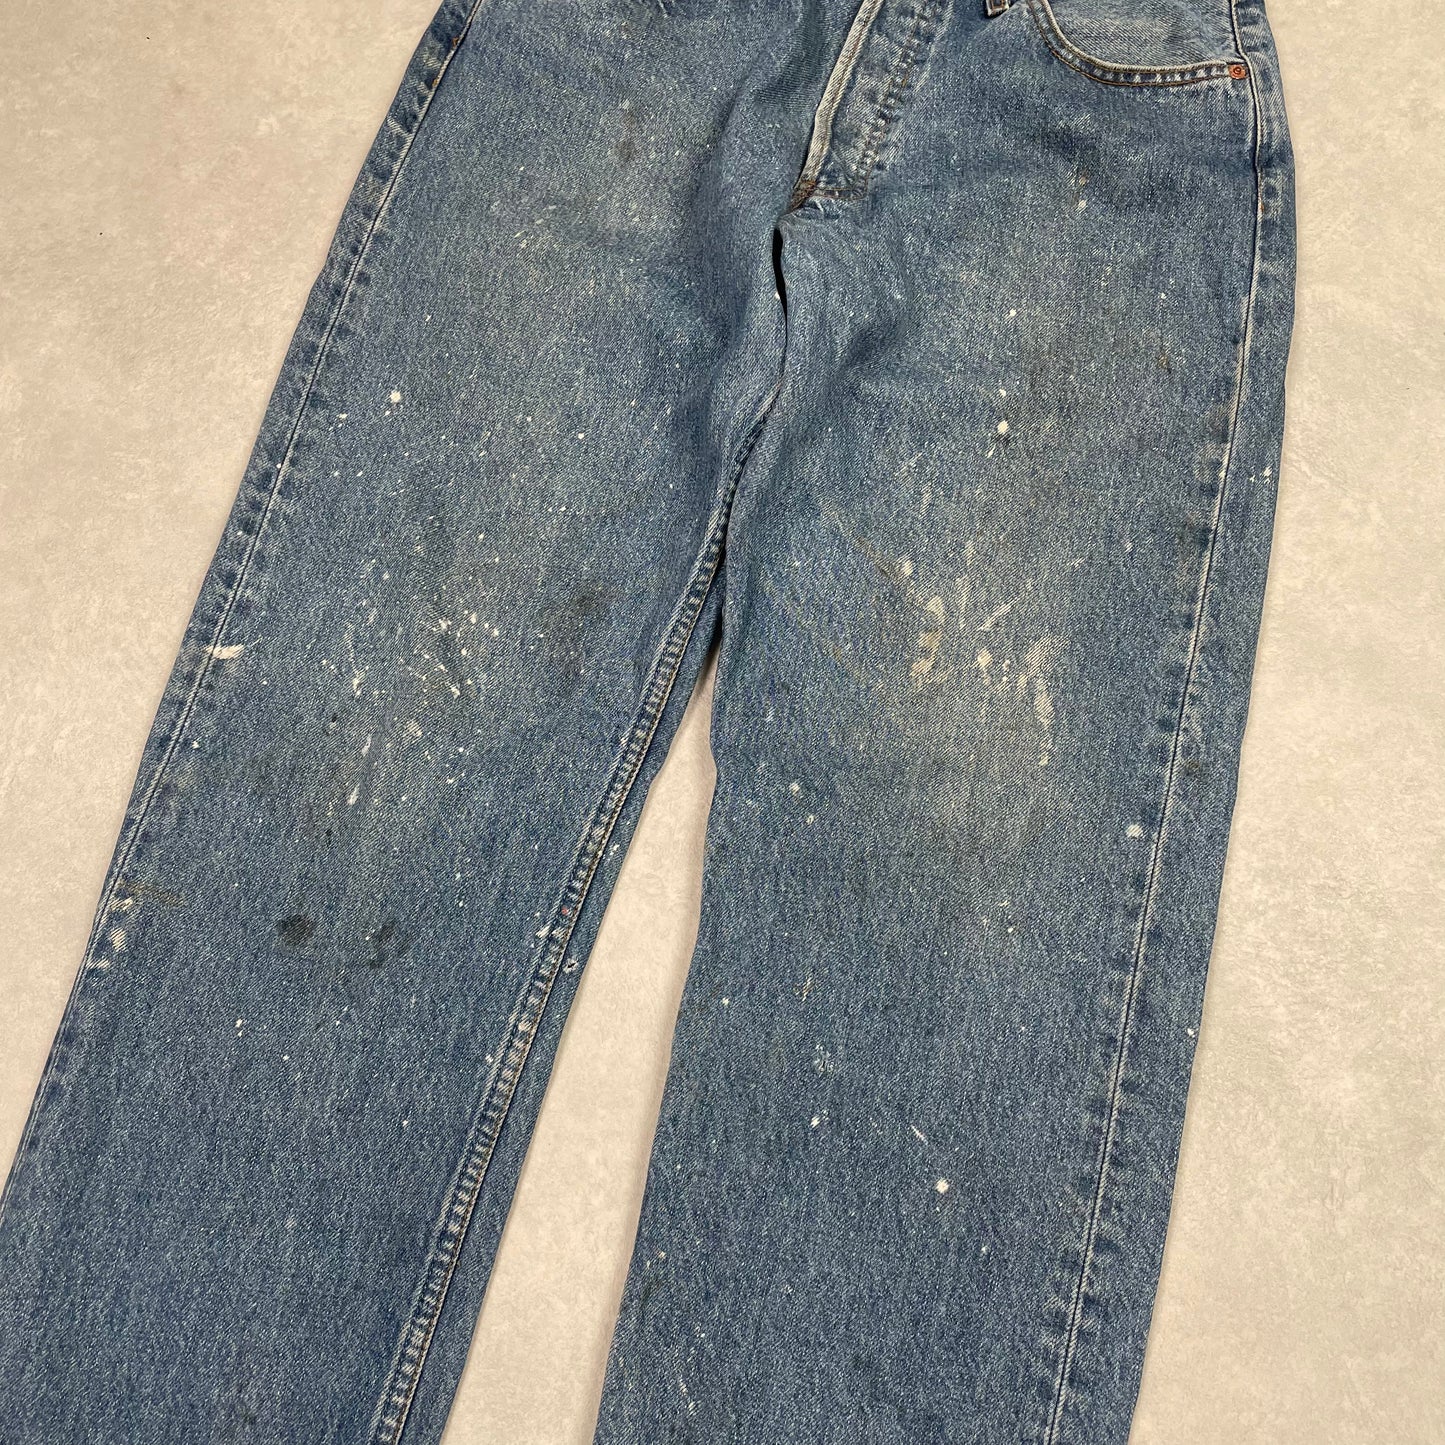 Levi’s 517 Jeans Paint Stained